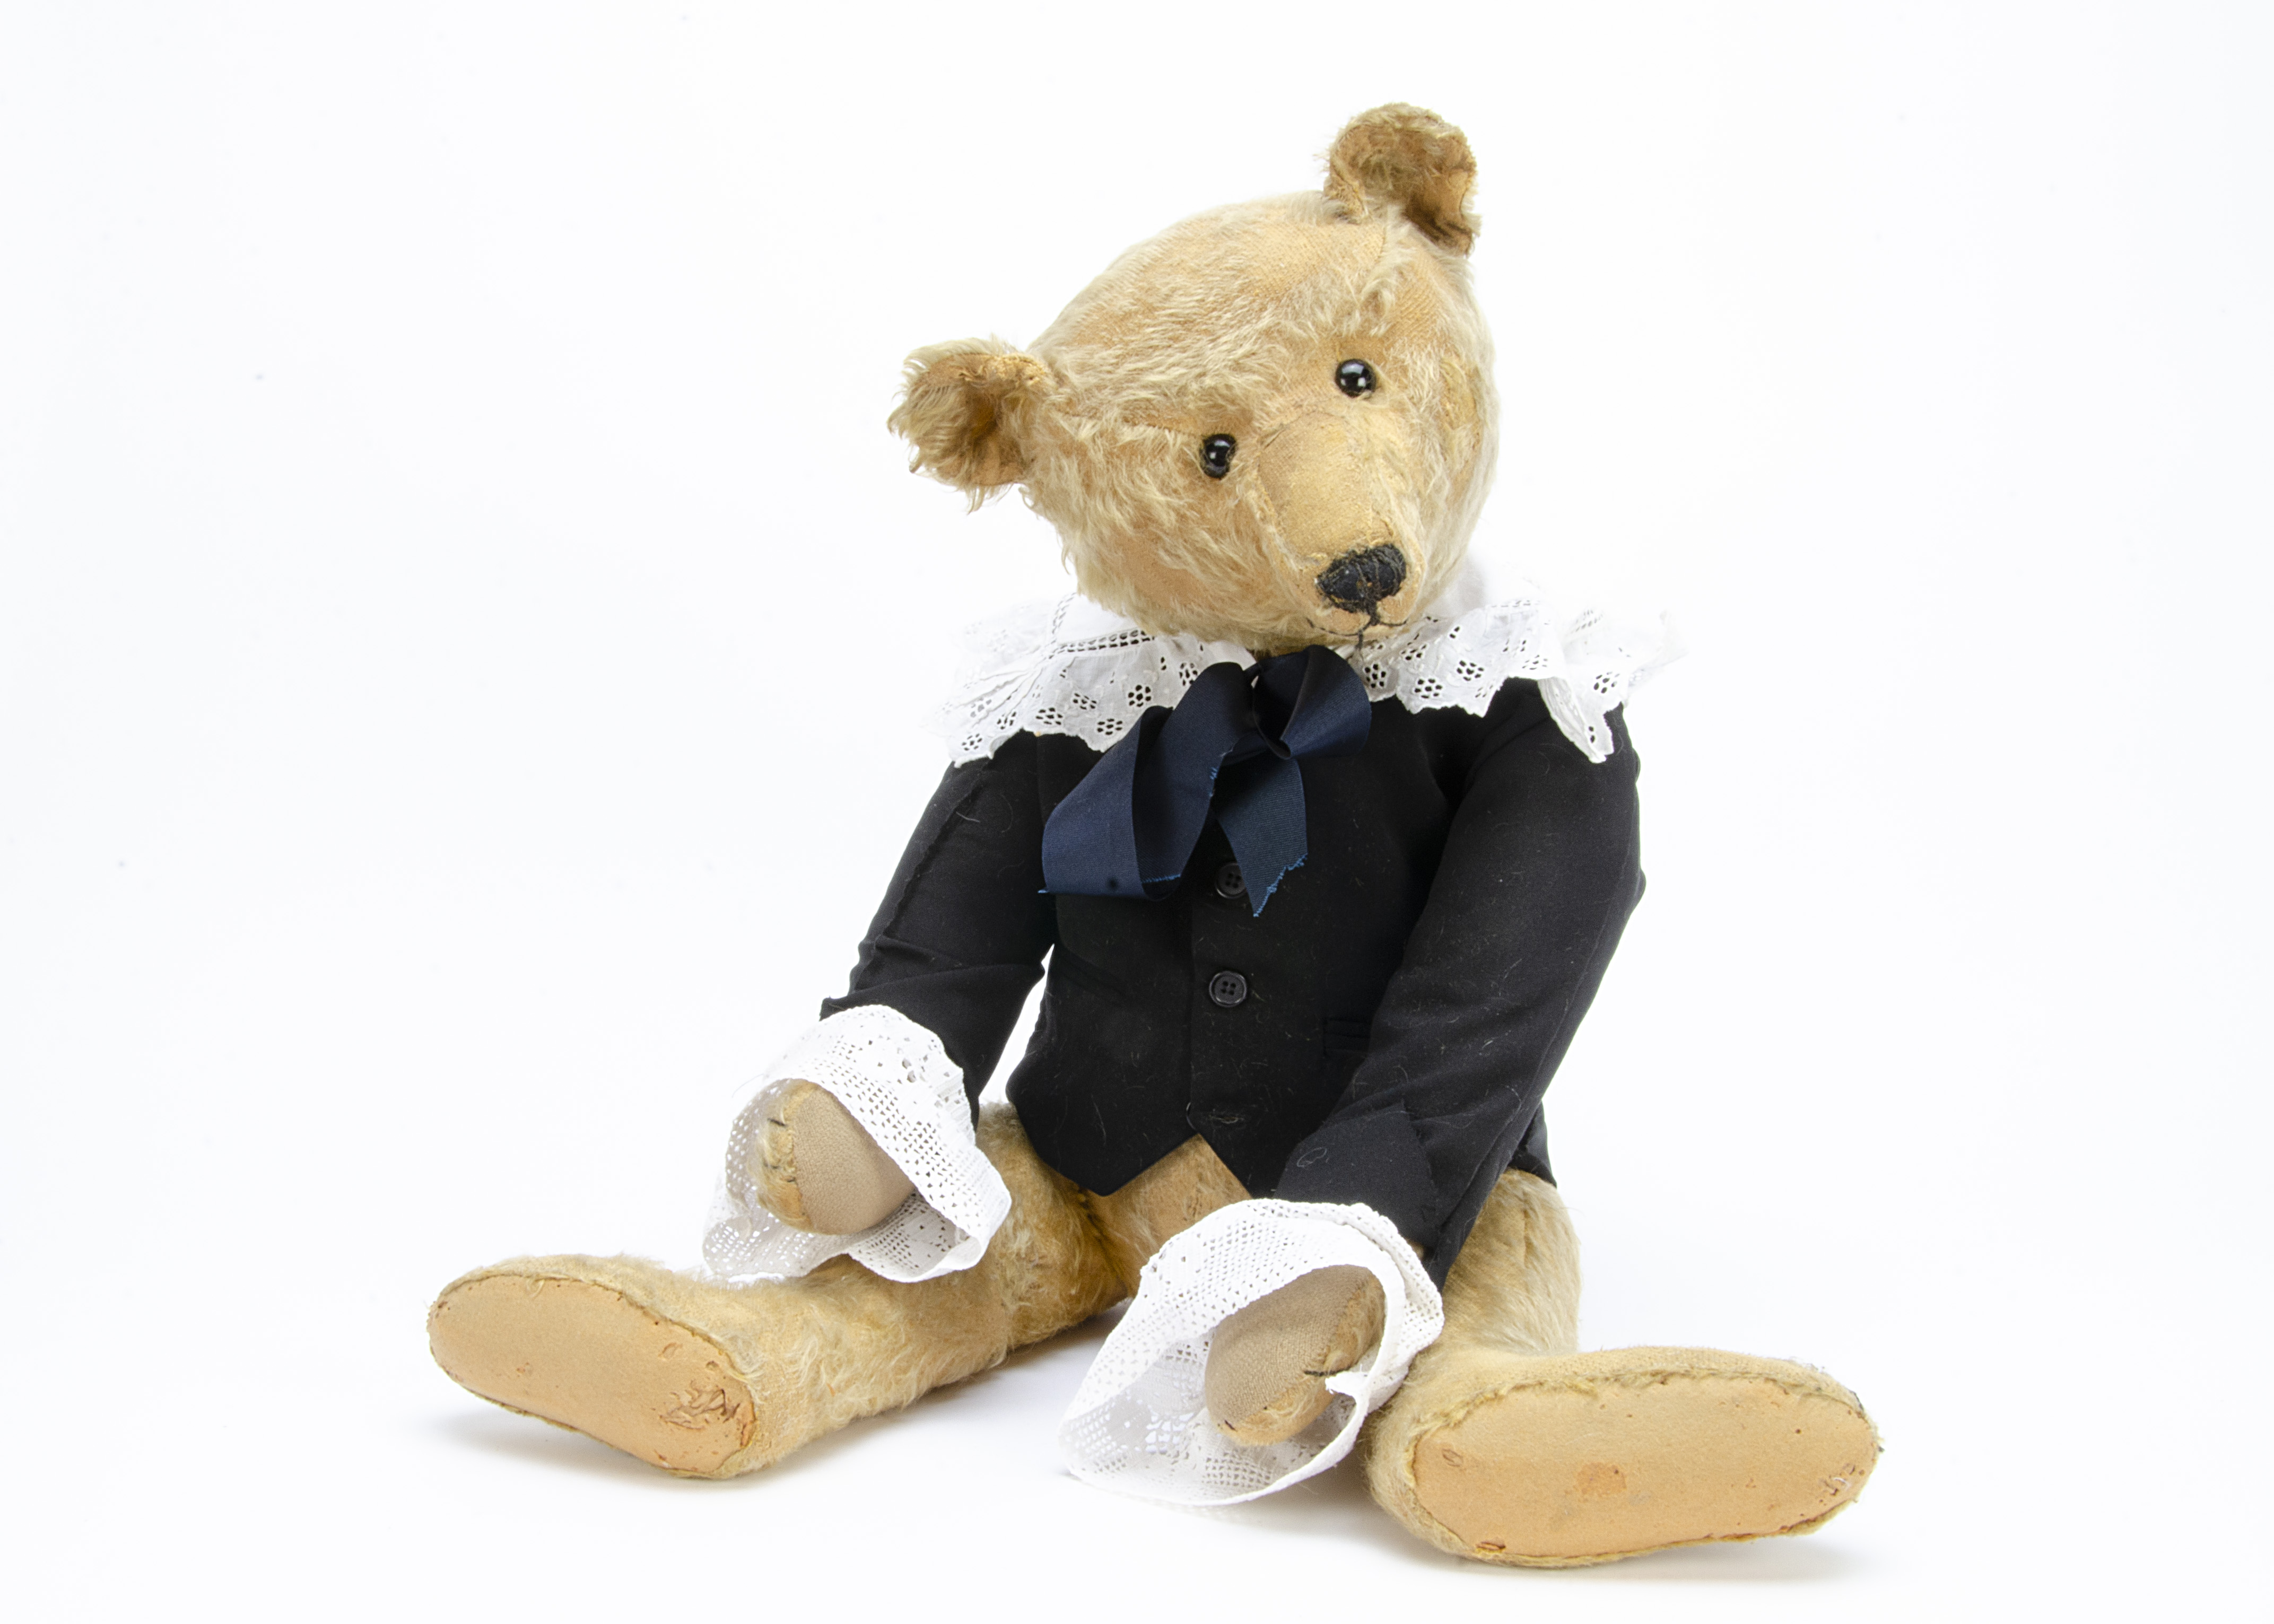 ’Jeremiah’ a large early Steiff teddy bear circa 1910, with golden mohair, black boot button eyes, - Image 4 of 4